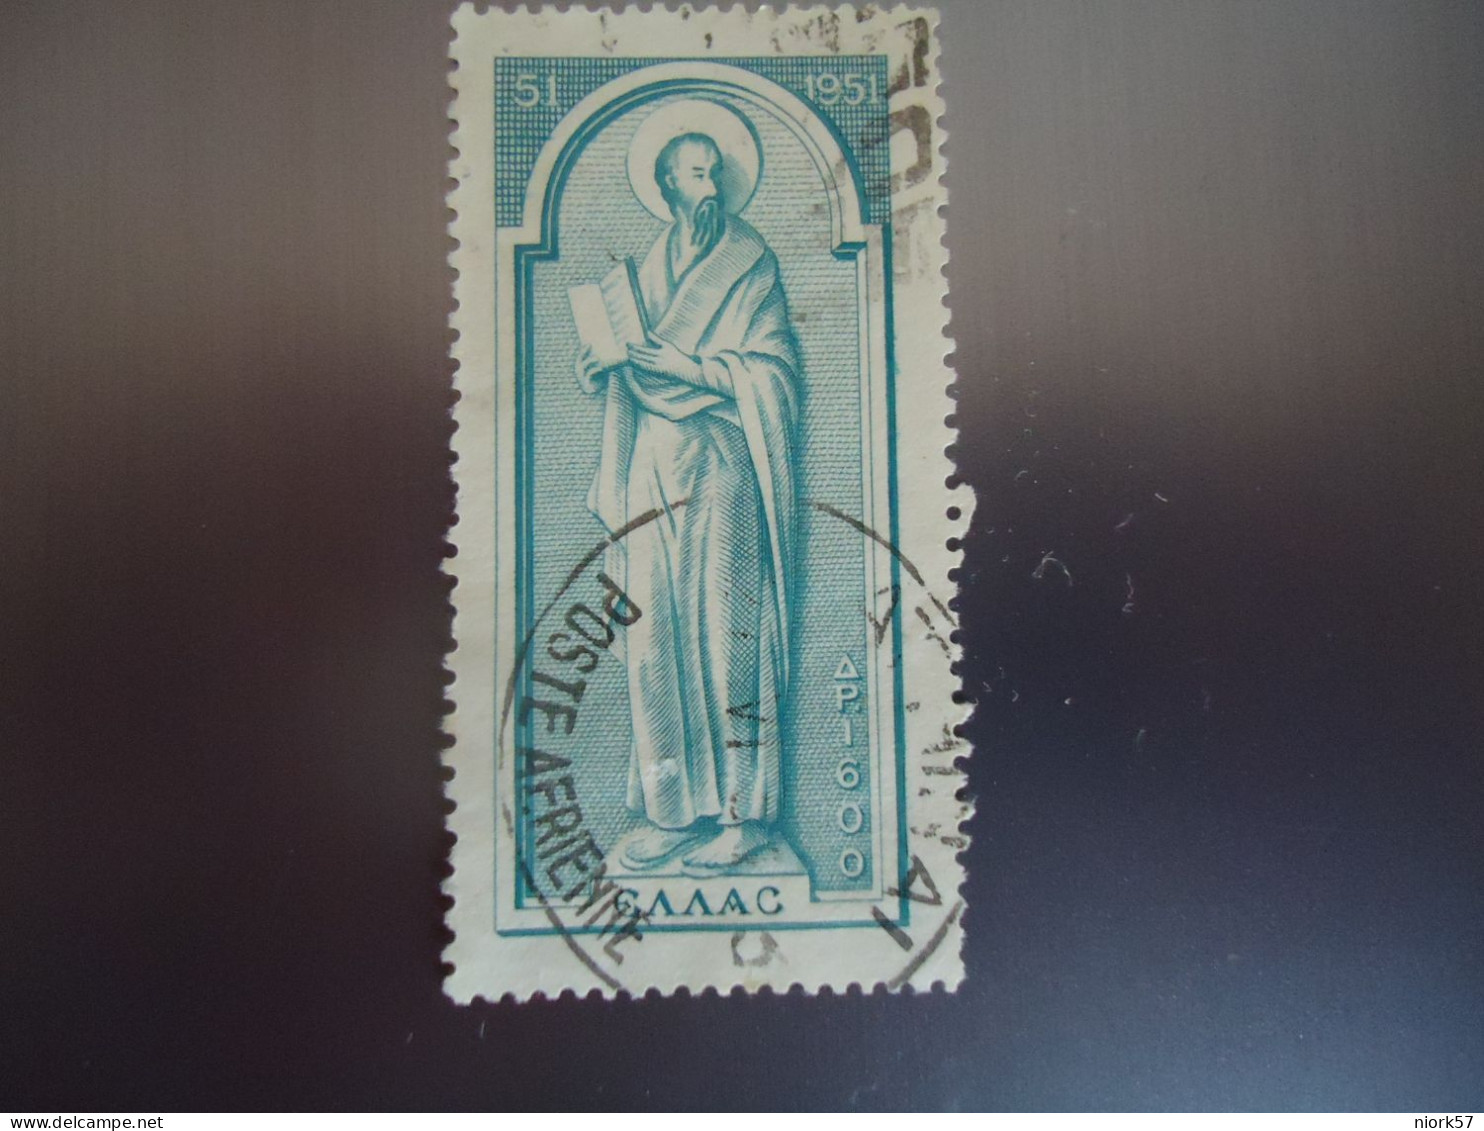 GREECE   USED STAMPS   POSTMARK  ΠΑΥΛΟΣ  ΑΘΗΝΑΙ POSTE AERIENNE 1951 - Oblitérés